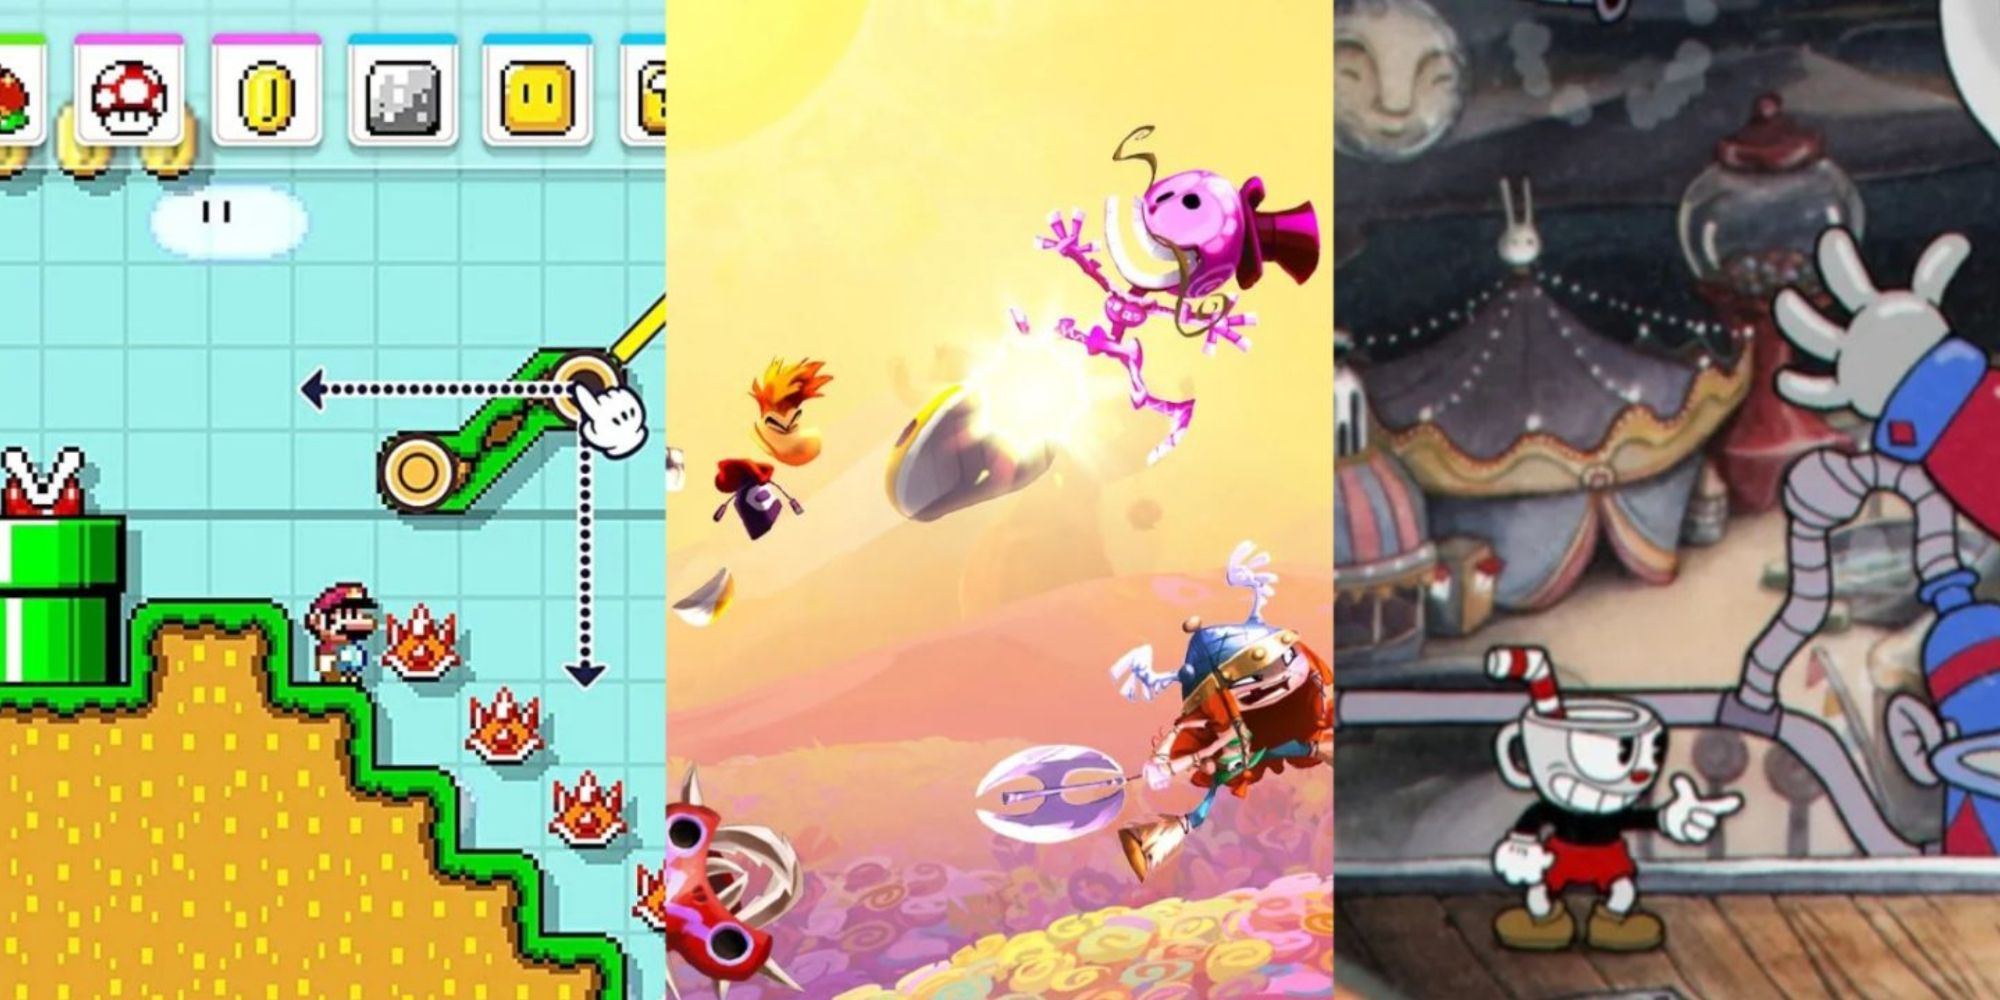 Gameplay split screen image of Super Mario Maker 2, Rayman Legends, and Cuphead